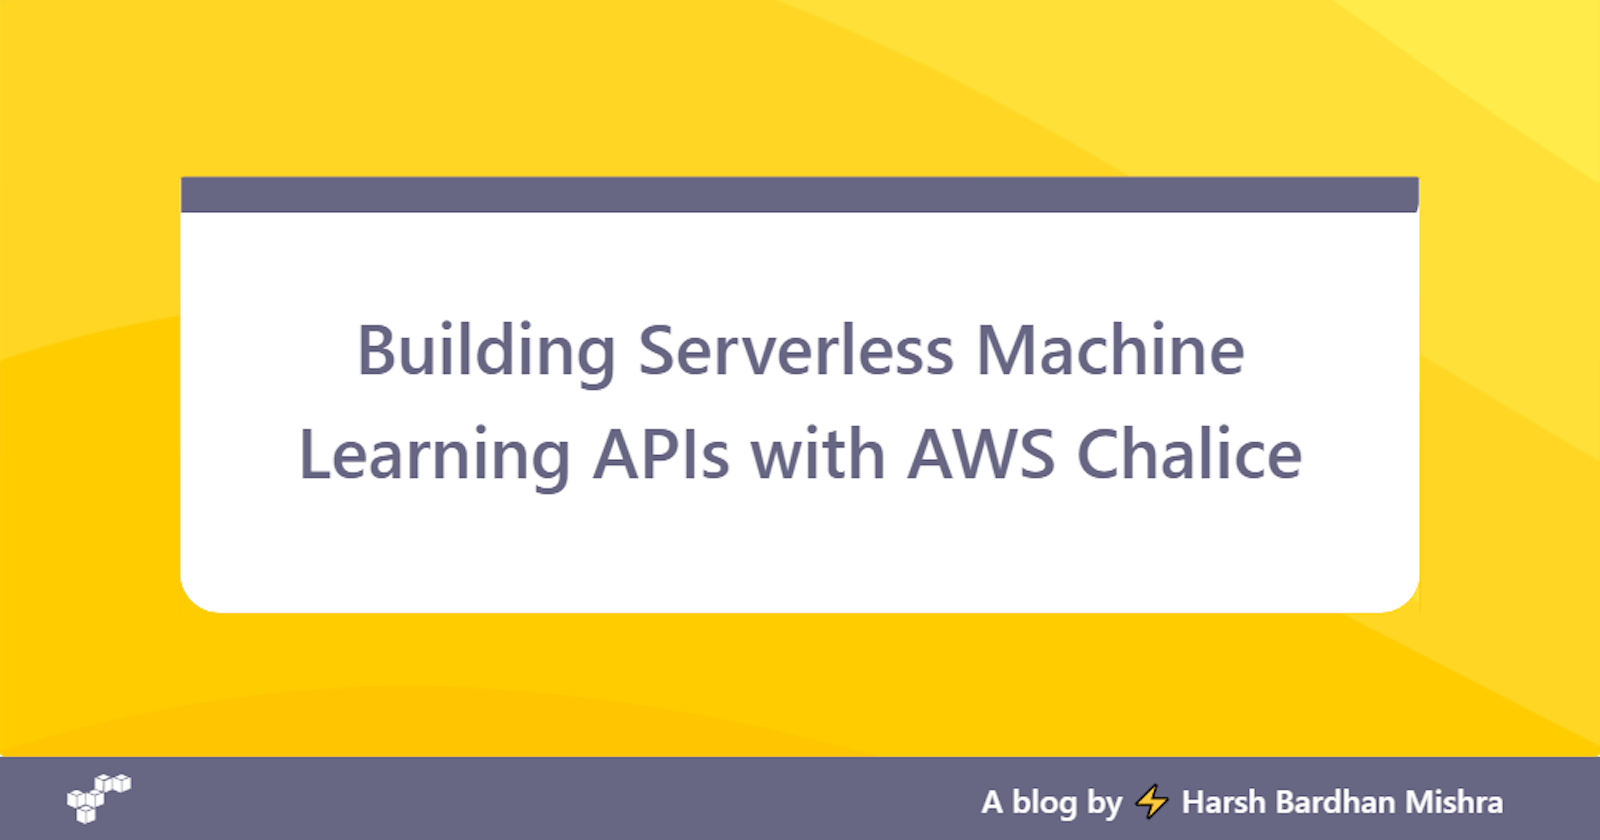 Building Serverless Machine Learning APIs with AWS Chalice